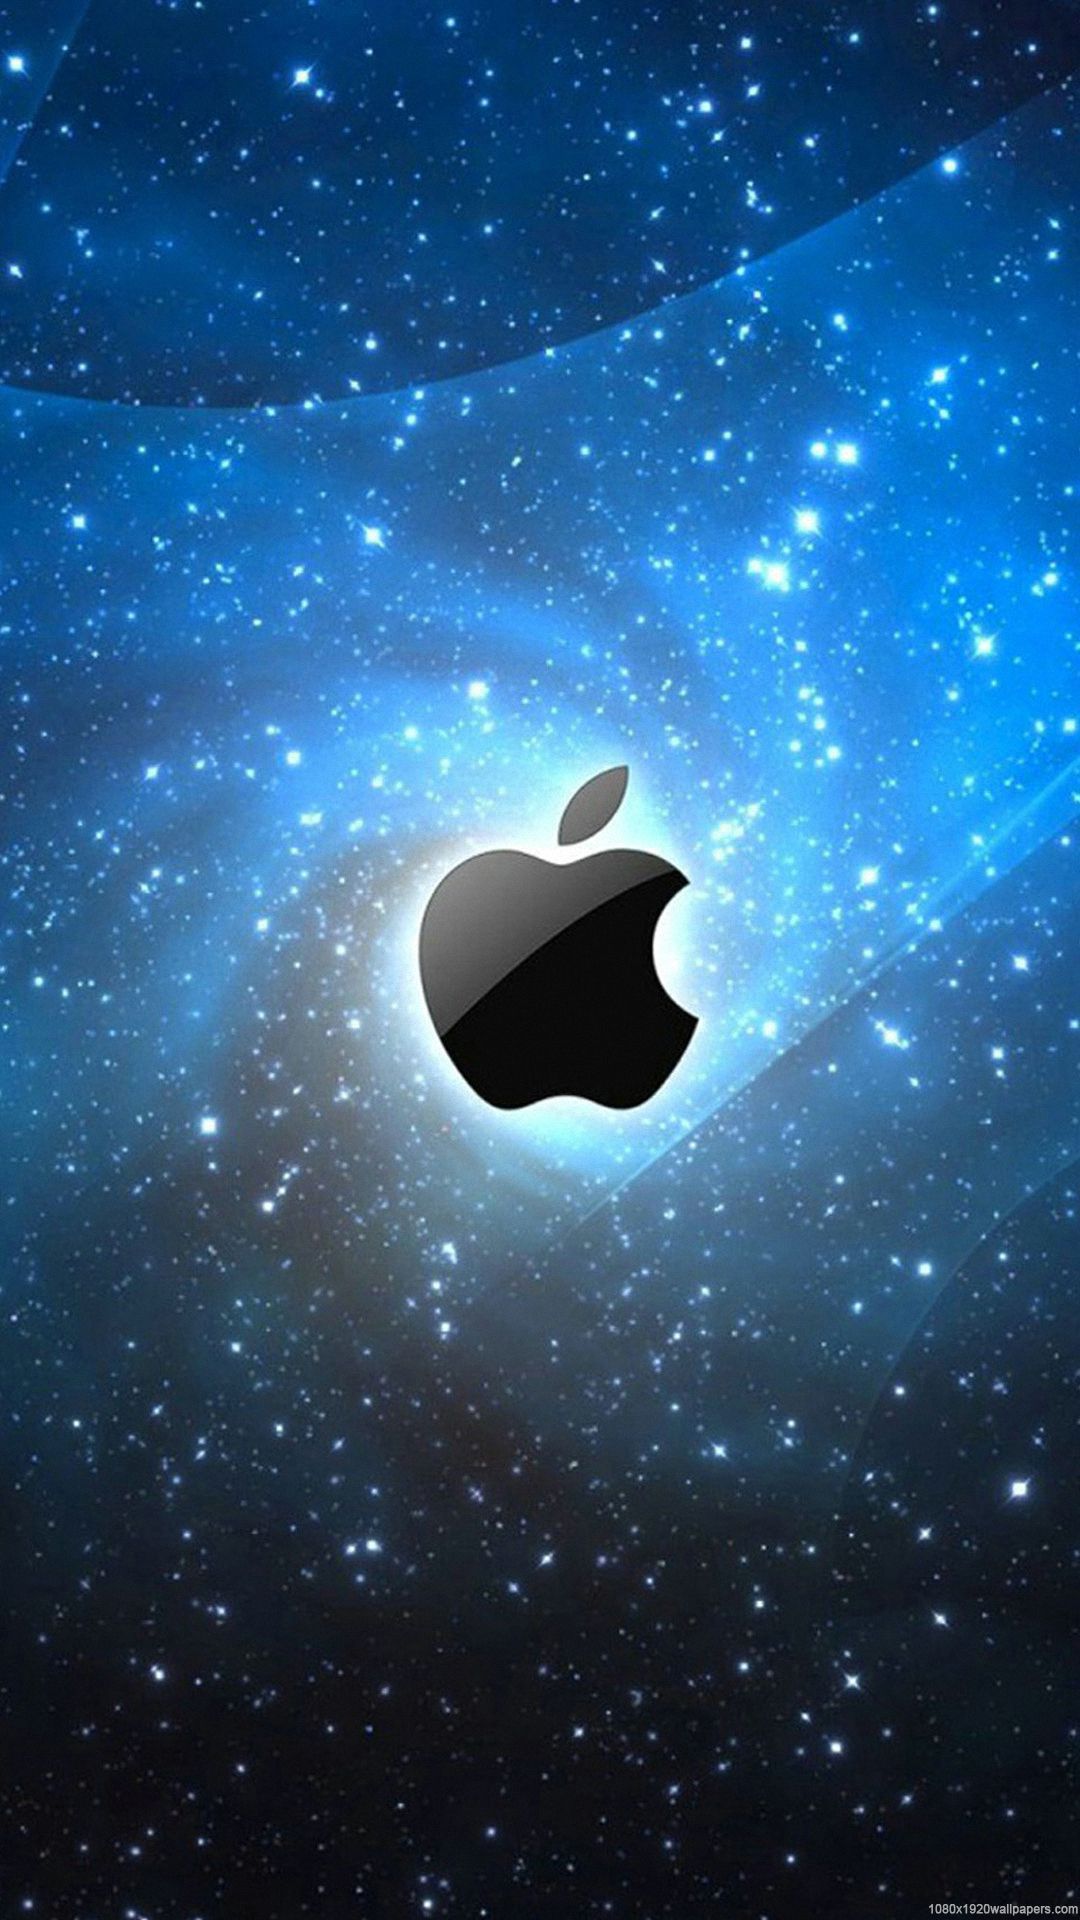 1080x1920 Cool Apple Wallpapers HD